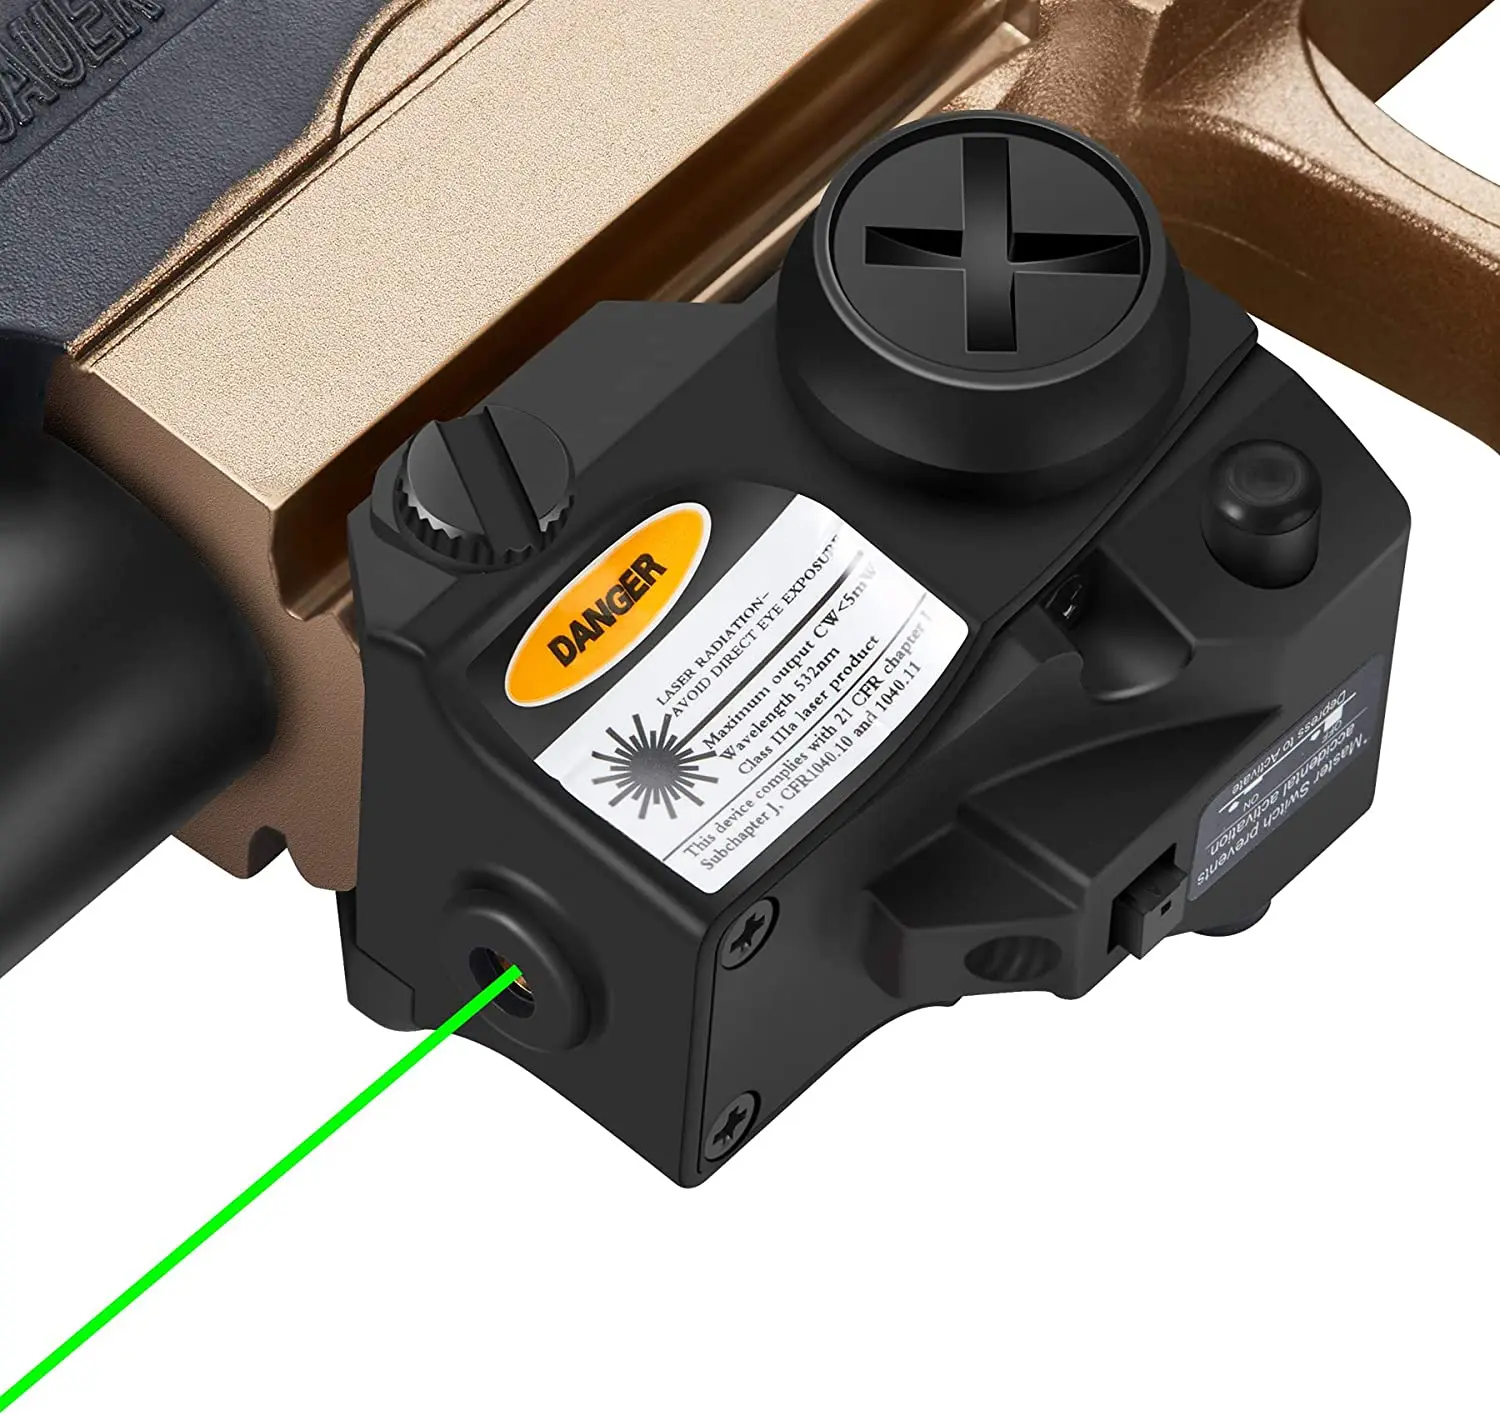 

Tactical Pistol Mini Green Red Laser Sight Picatinny Rail Weapon Laser for Self Defense